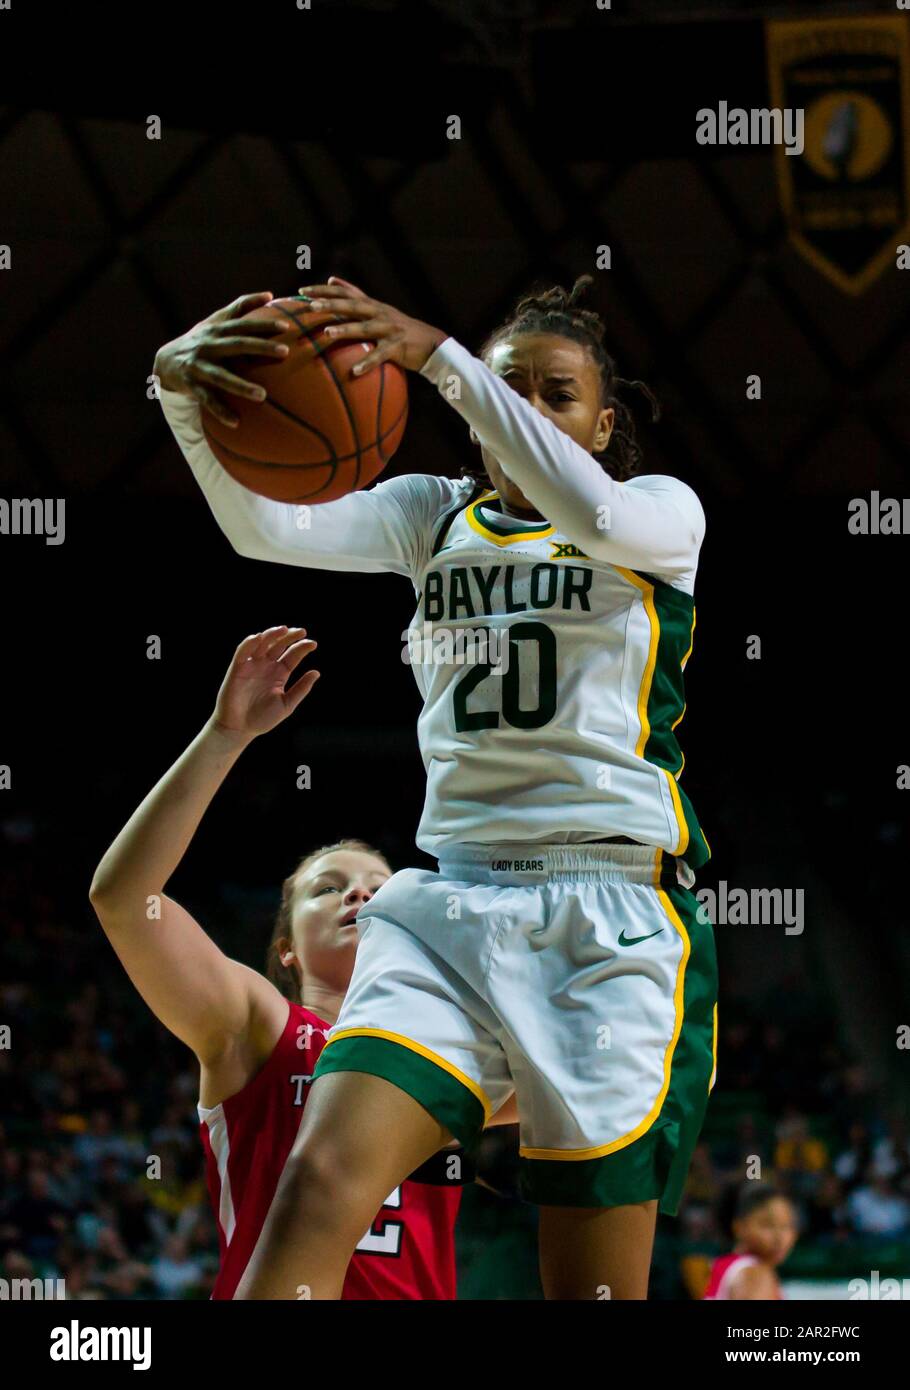 Waco, Texas, USA. 25th Jan, 2020. Baylor Lady Bears guard Juicy Landrum (20) comes down with a rebound during the 1st half of the NCAA Women's Basketball game between Texas Tech Red Raiders and the Baylor Lady Bears at The Ferrell Center in Waco, Texas. Matthew Lynch/CSM/Alamy Live News Stock Photo